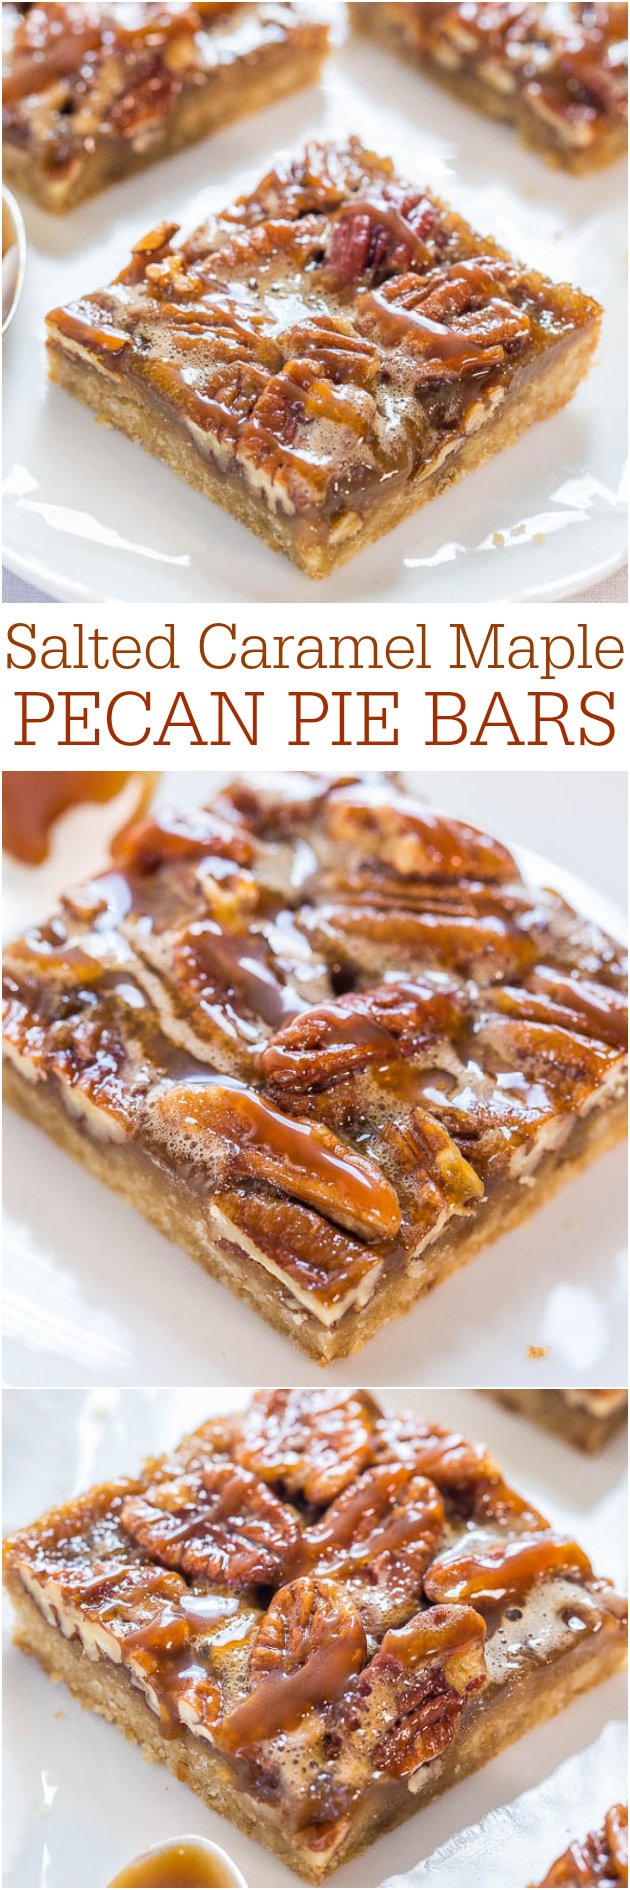 Salted Caramel Maple Pecan Pie Bars — This pecan pie bars recipe is a fast, one-bowl, no-mixer recipe, but the bars taste like you slaved over them. So much easier than making pecan pie!